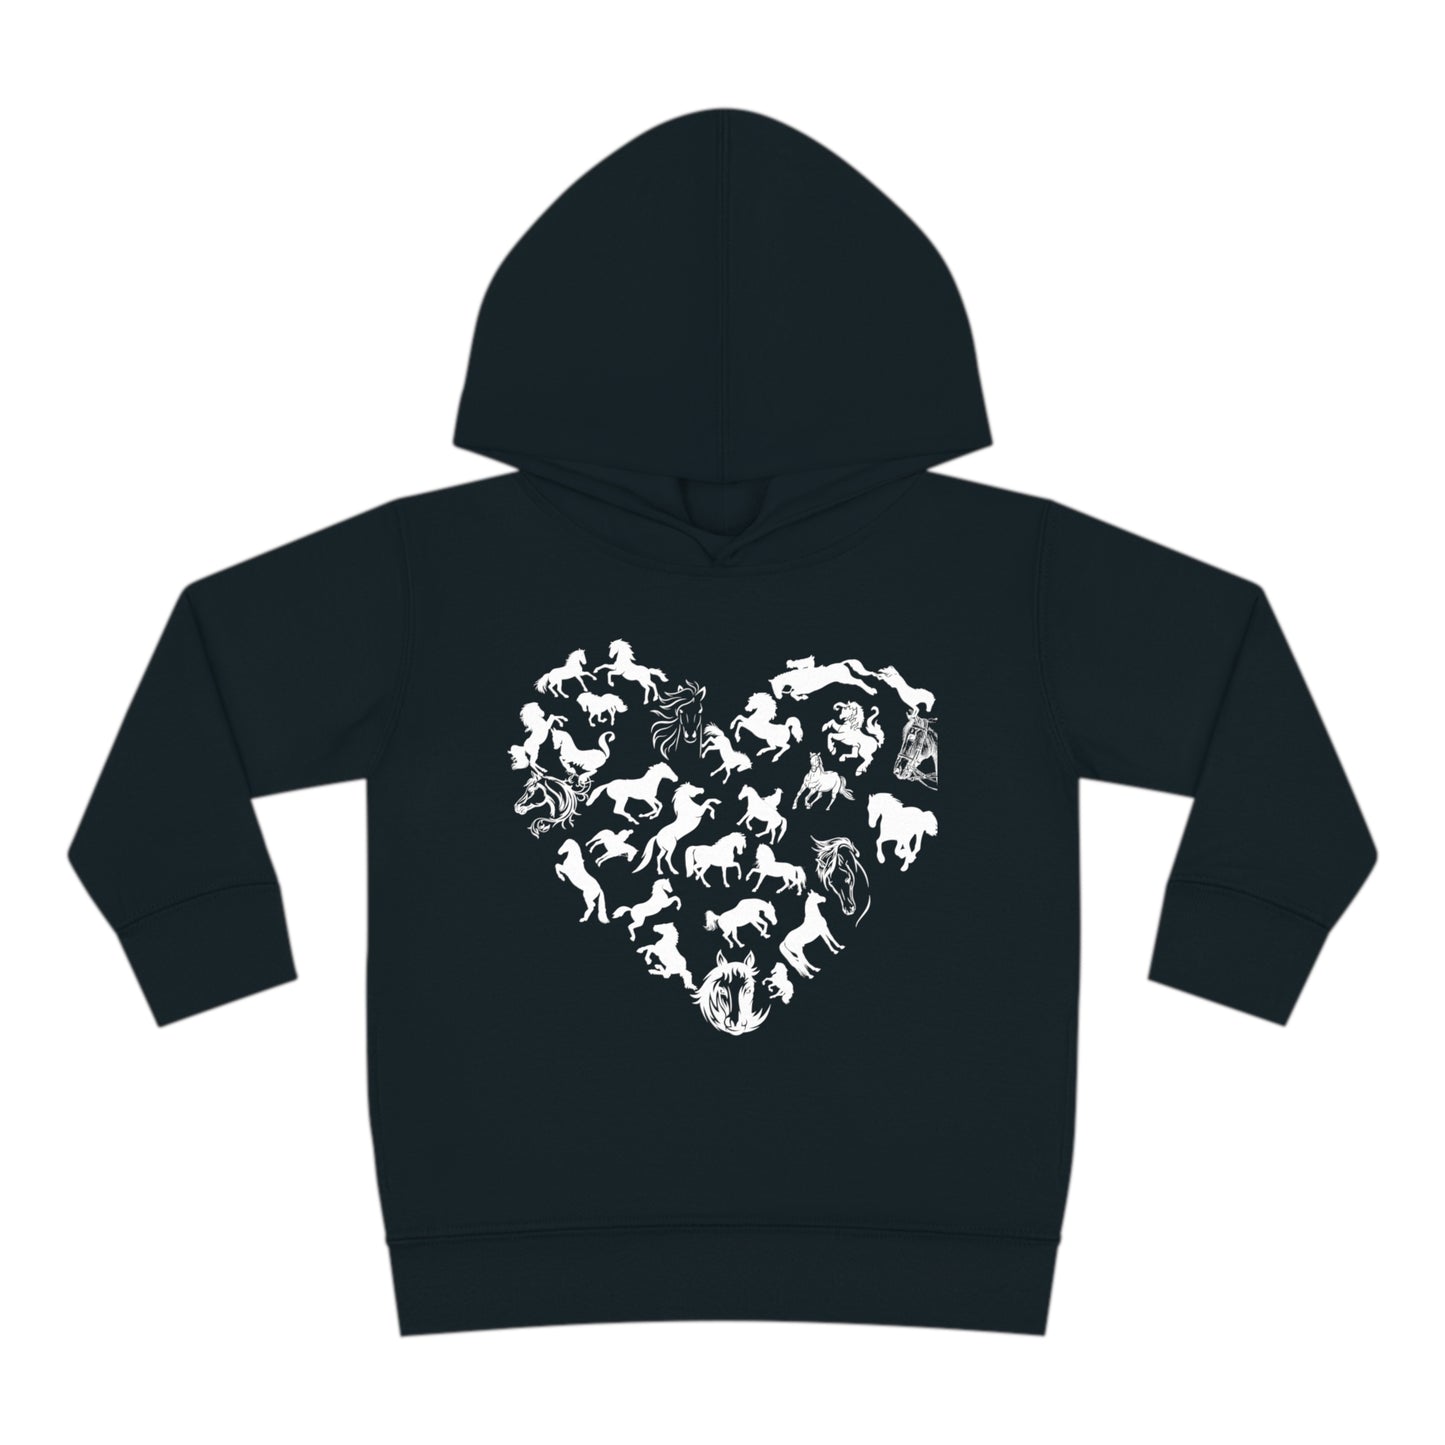 Horse Heart Hoodie | Horse Lover Tee - Horses Heart Toddler - Horse Lover Gift - Horse Toddler Shirt - Equestrian Tee - Gift for Horse Owner Kids clothes Black 2T 